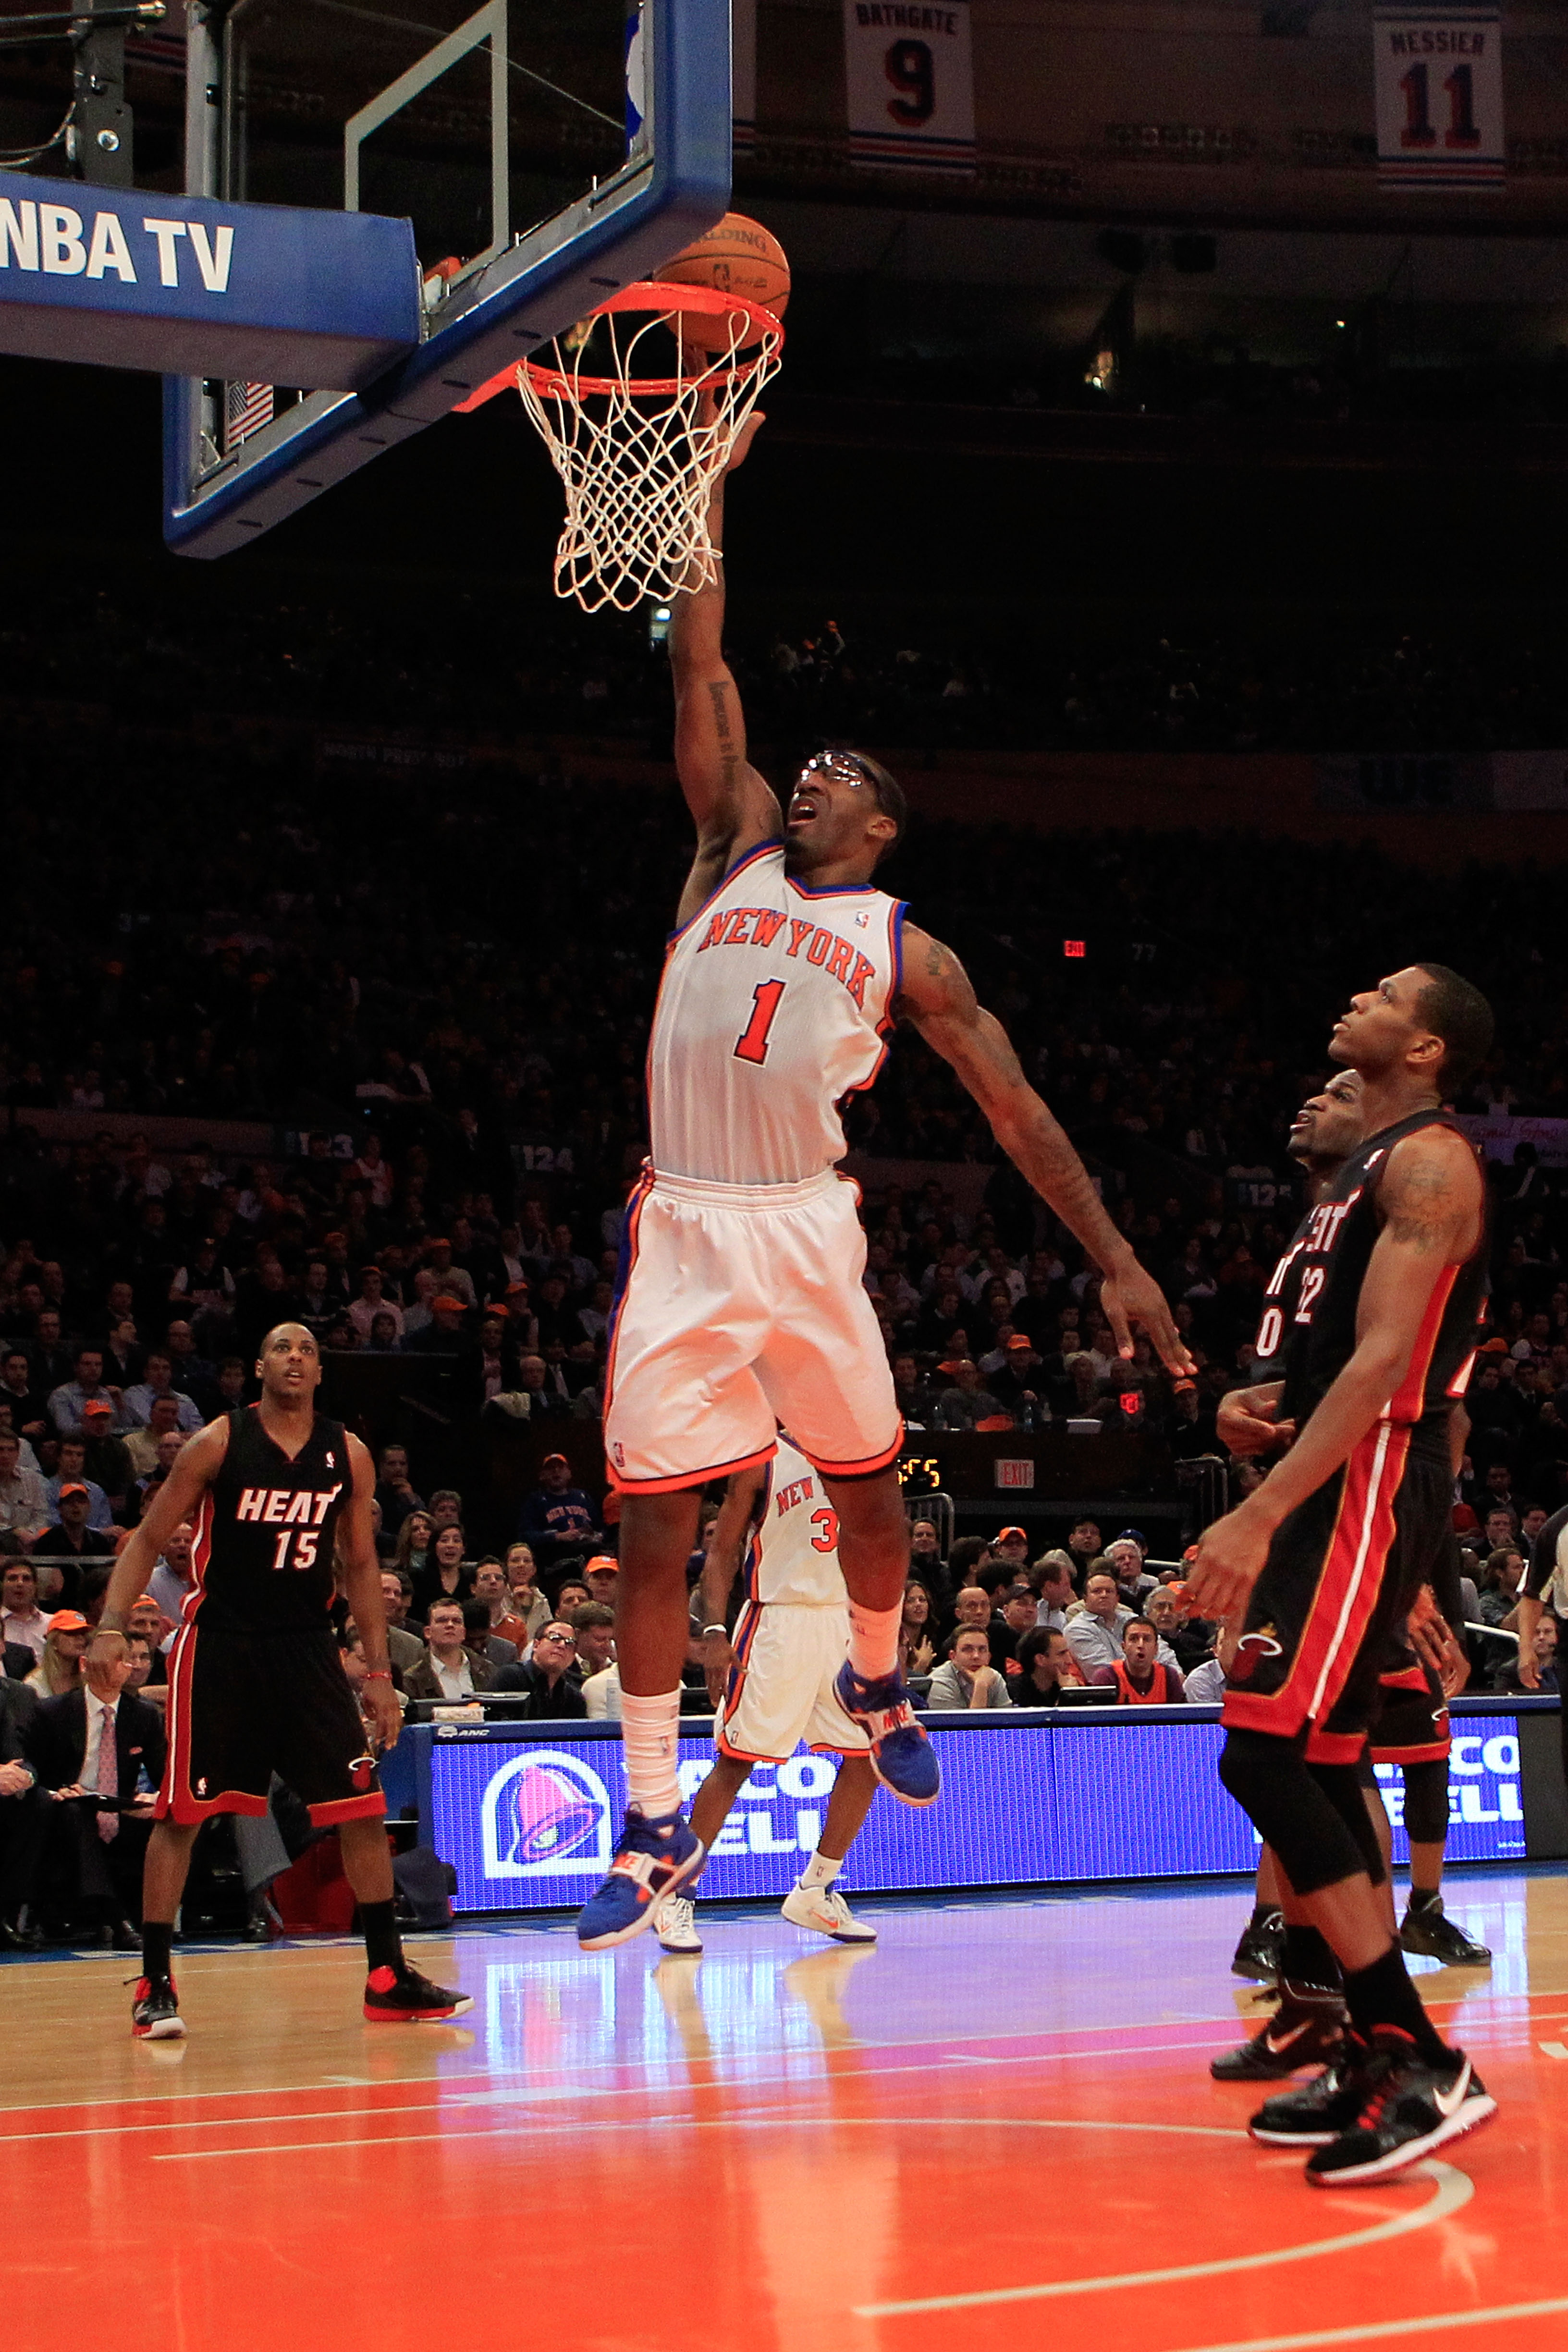 Top 5 dunks of Amar'e Stoudemire's career